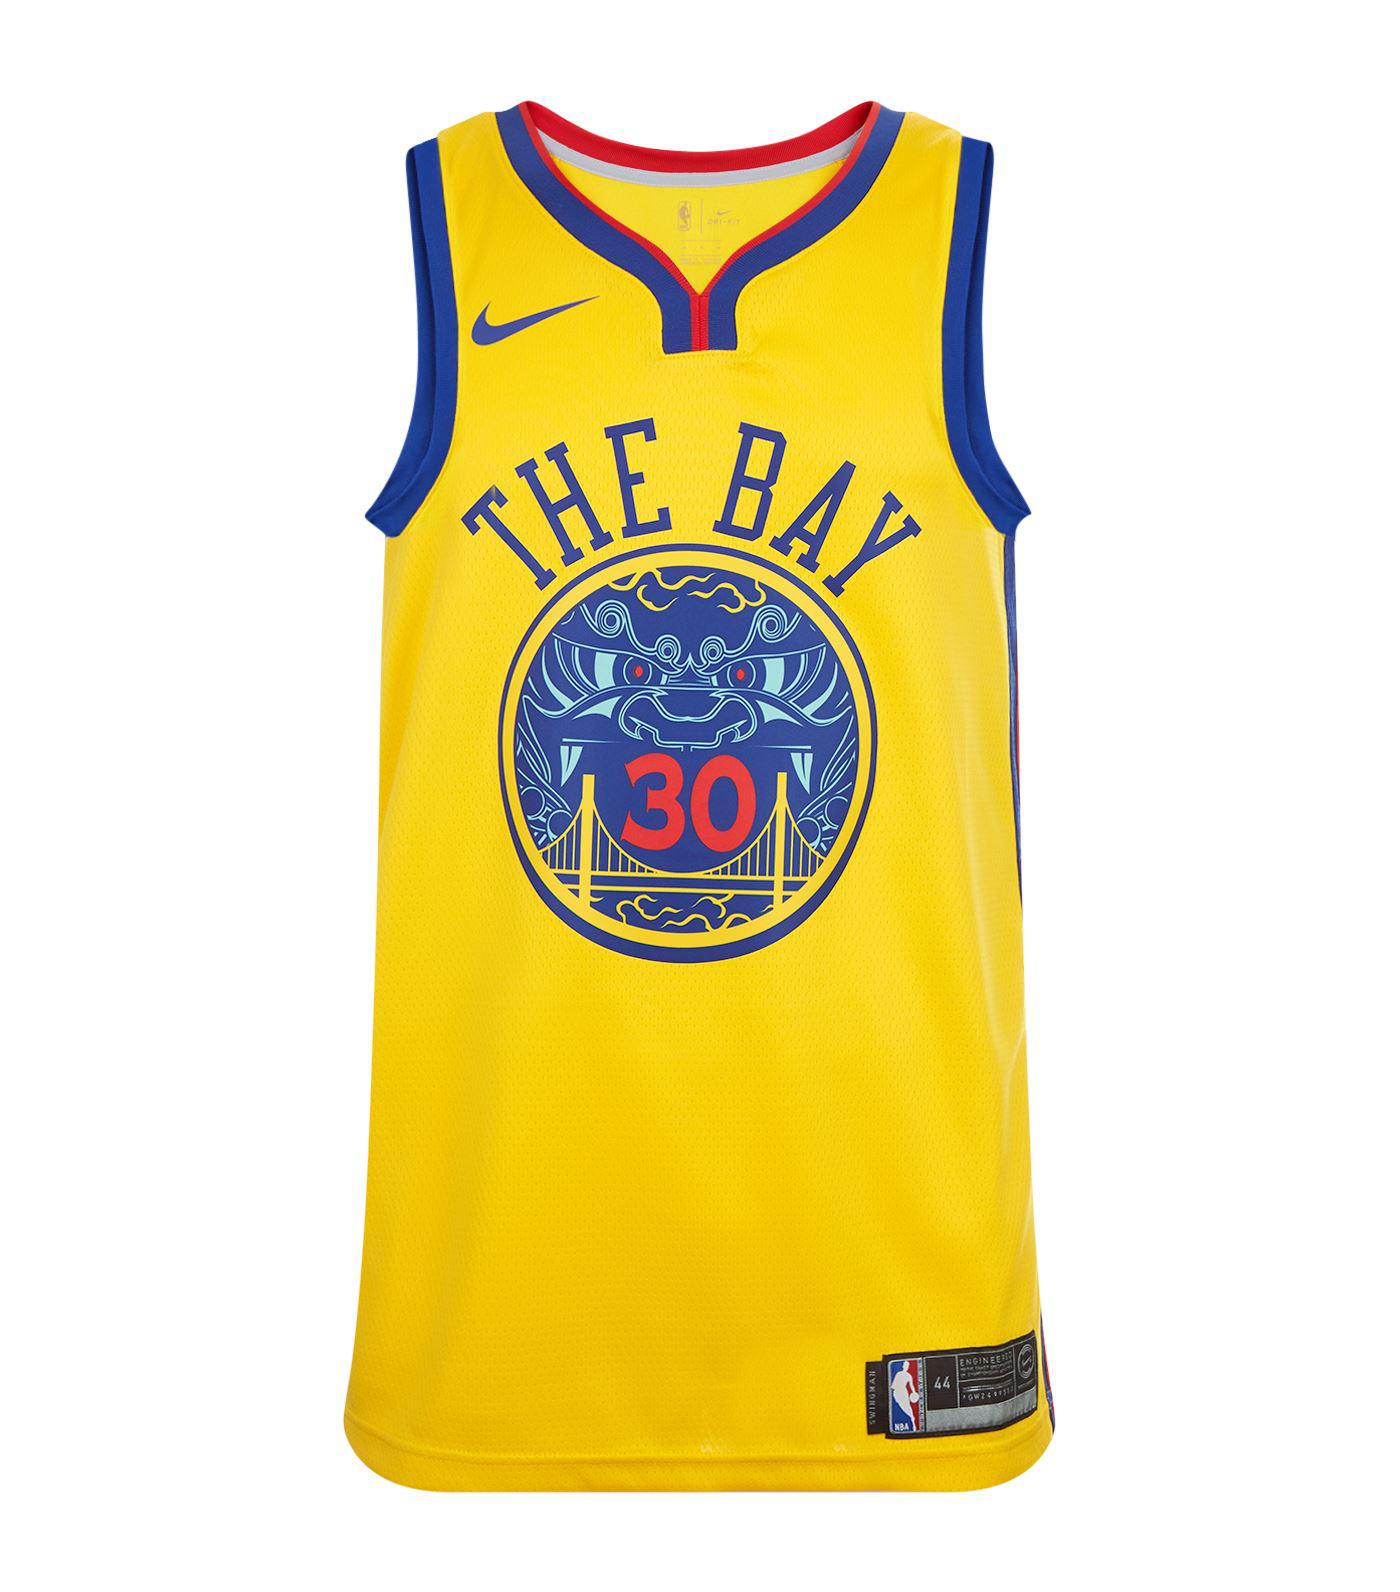 Golden State Basketball Jersey Top Sellers, 57% OFF 